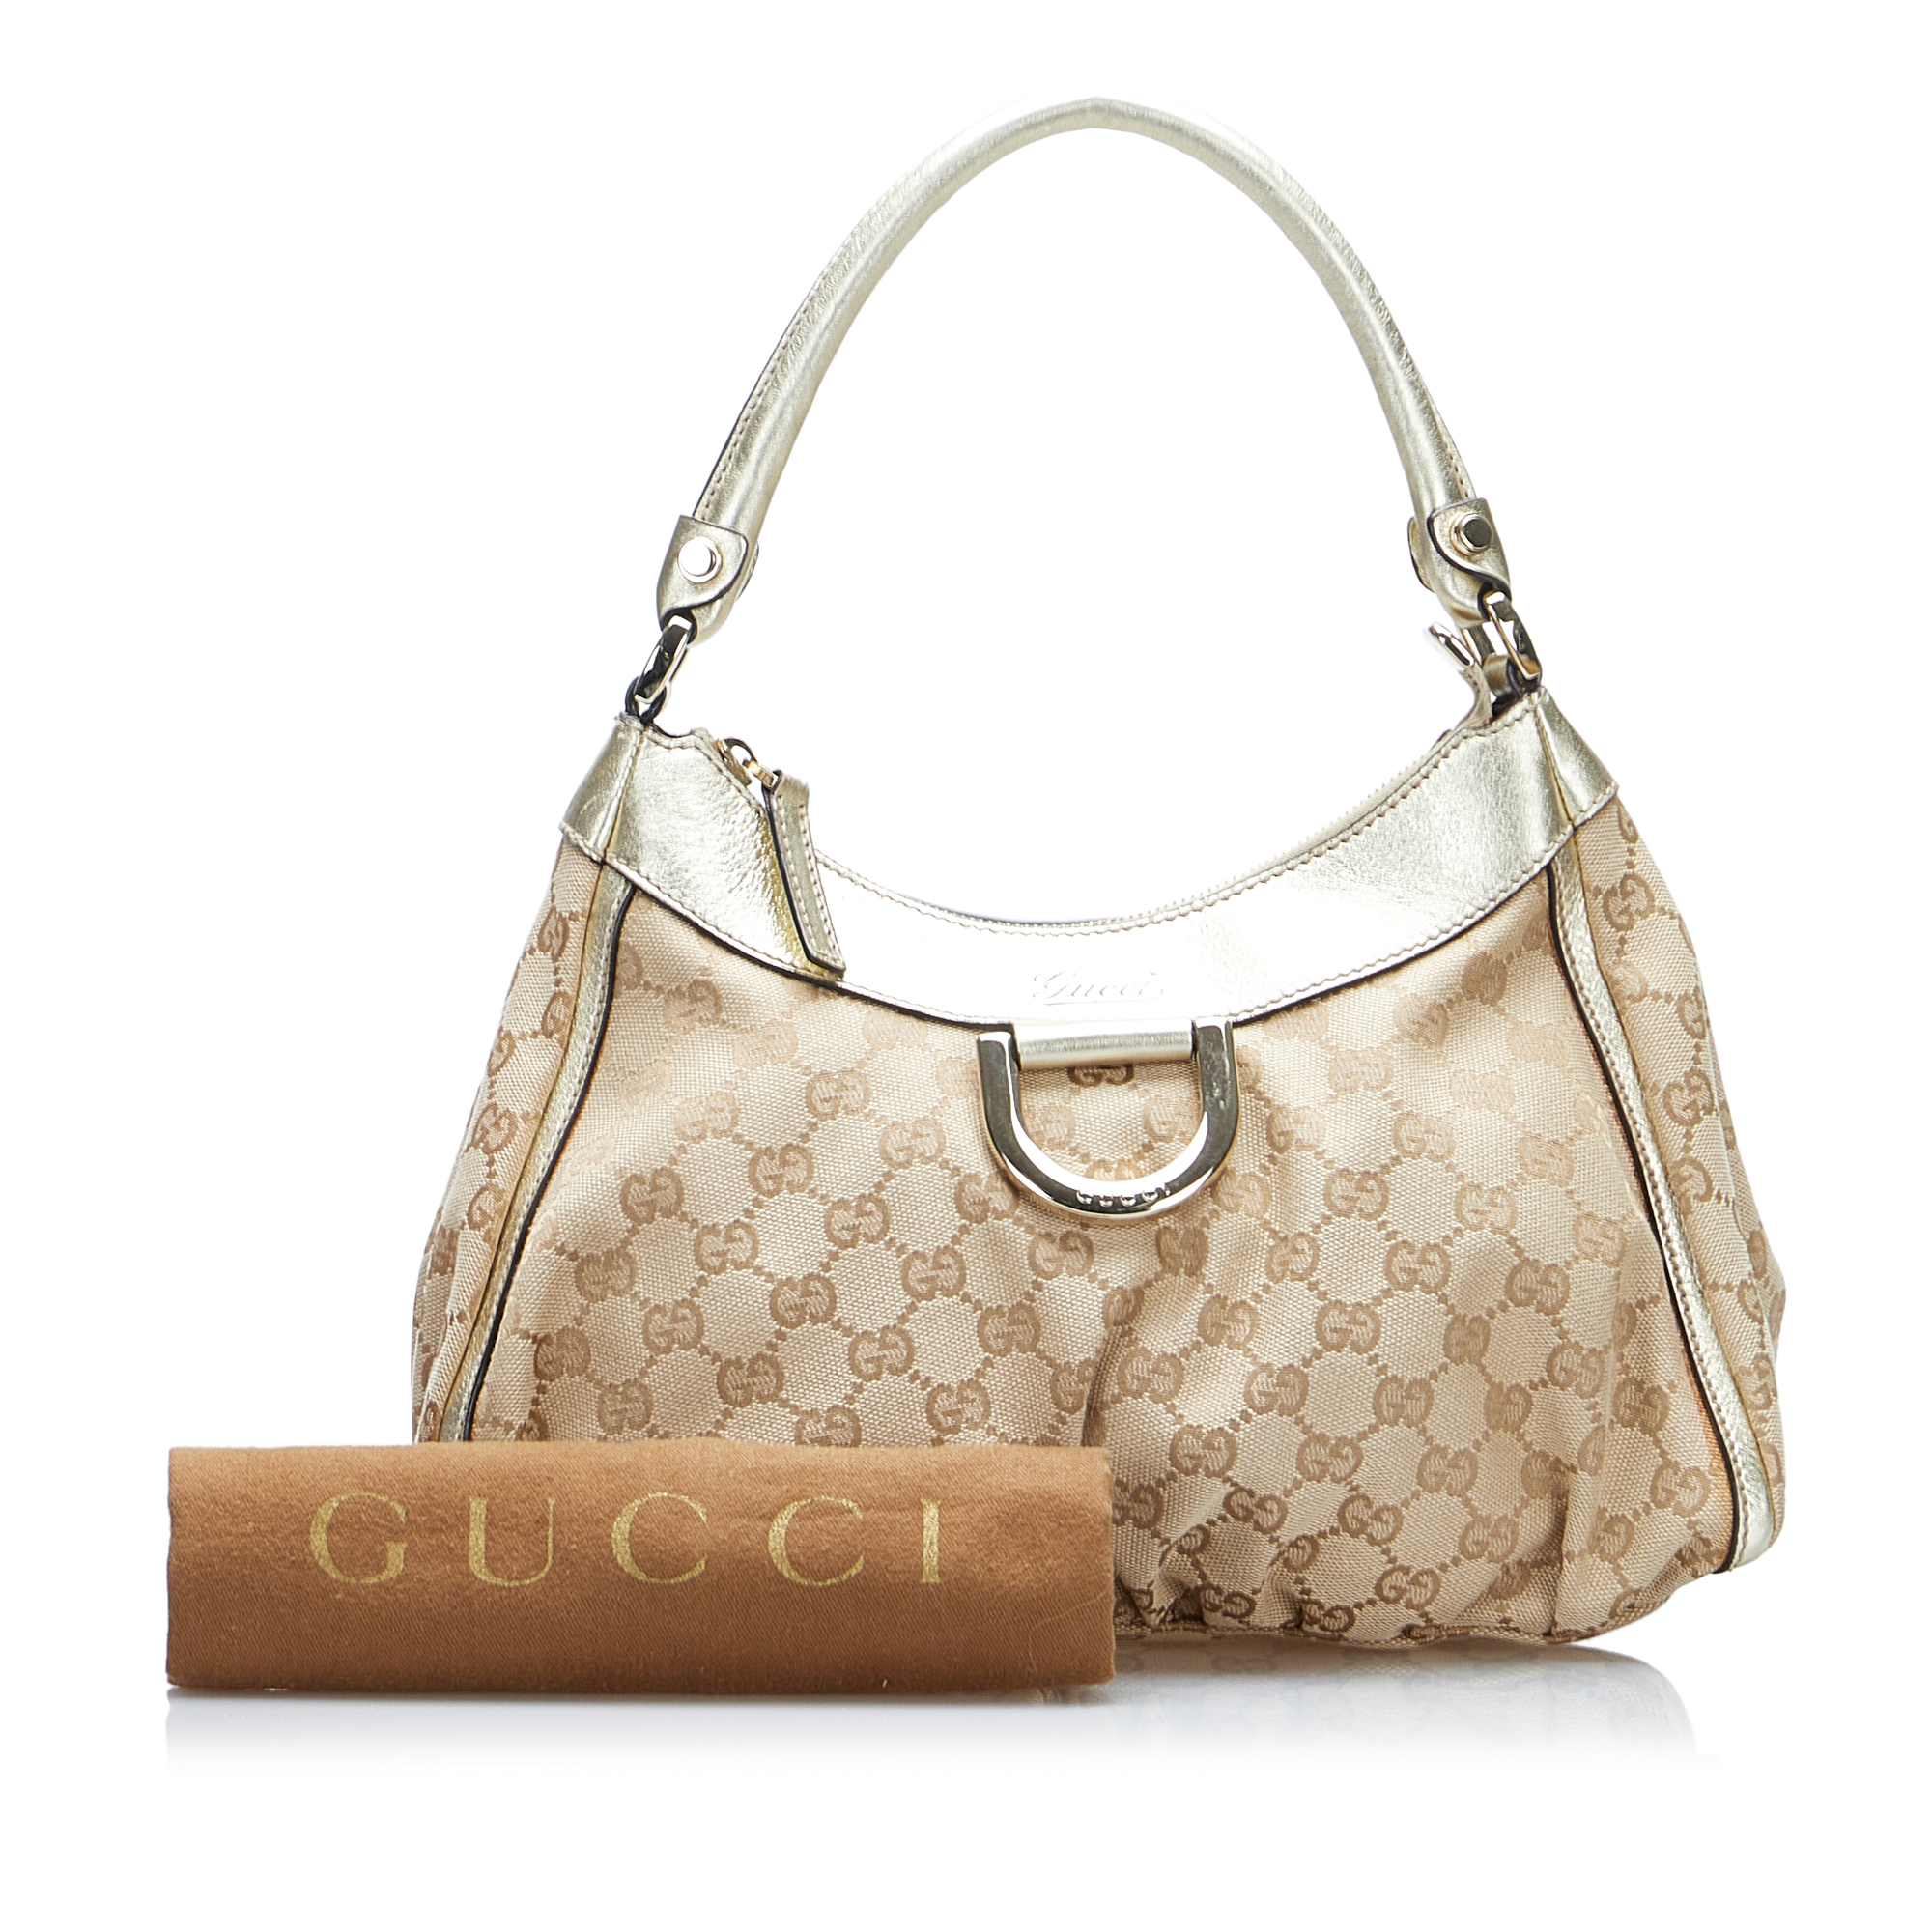 Gucci GG Canvas Abbey D Ring Shoulder Bag - Image 11 of 11